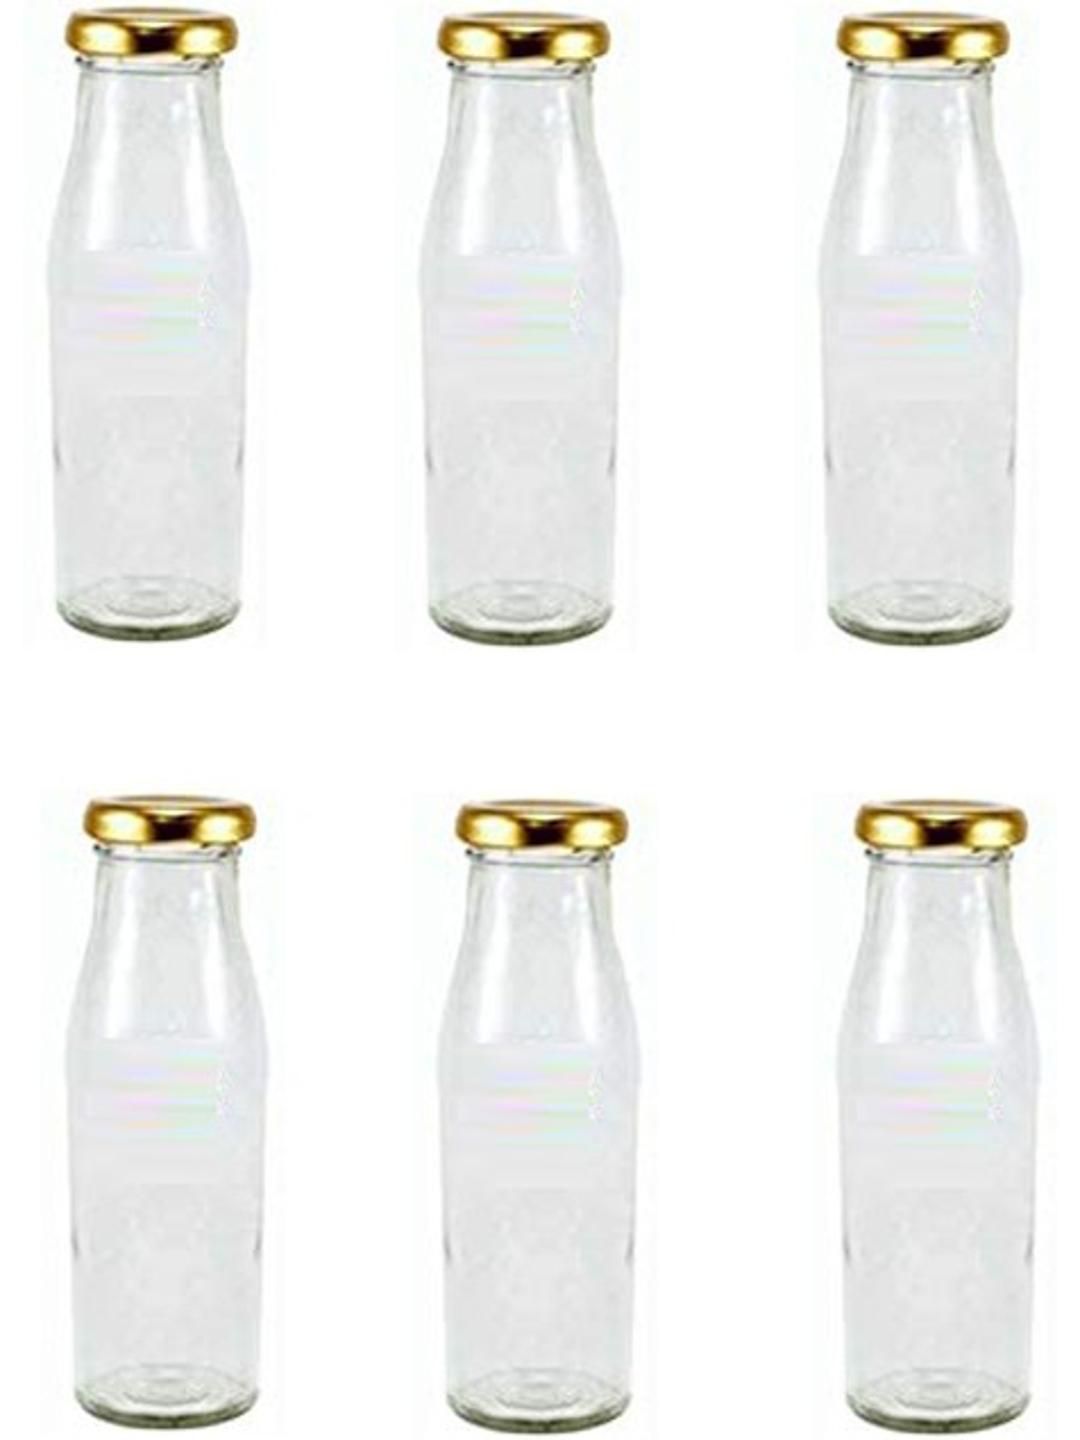     			AFAST Multipurpose Bottle Glass Transparent Utility Container ( Set of 6 )